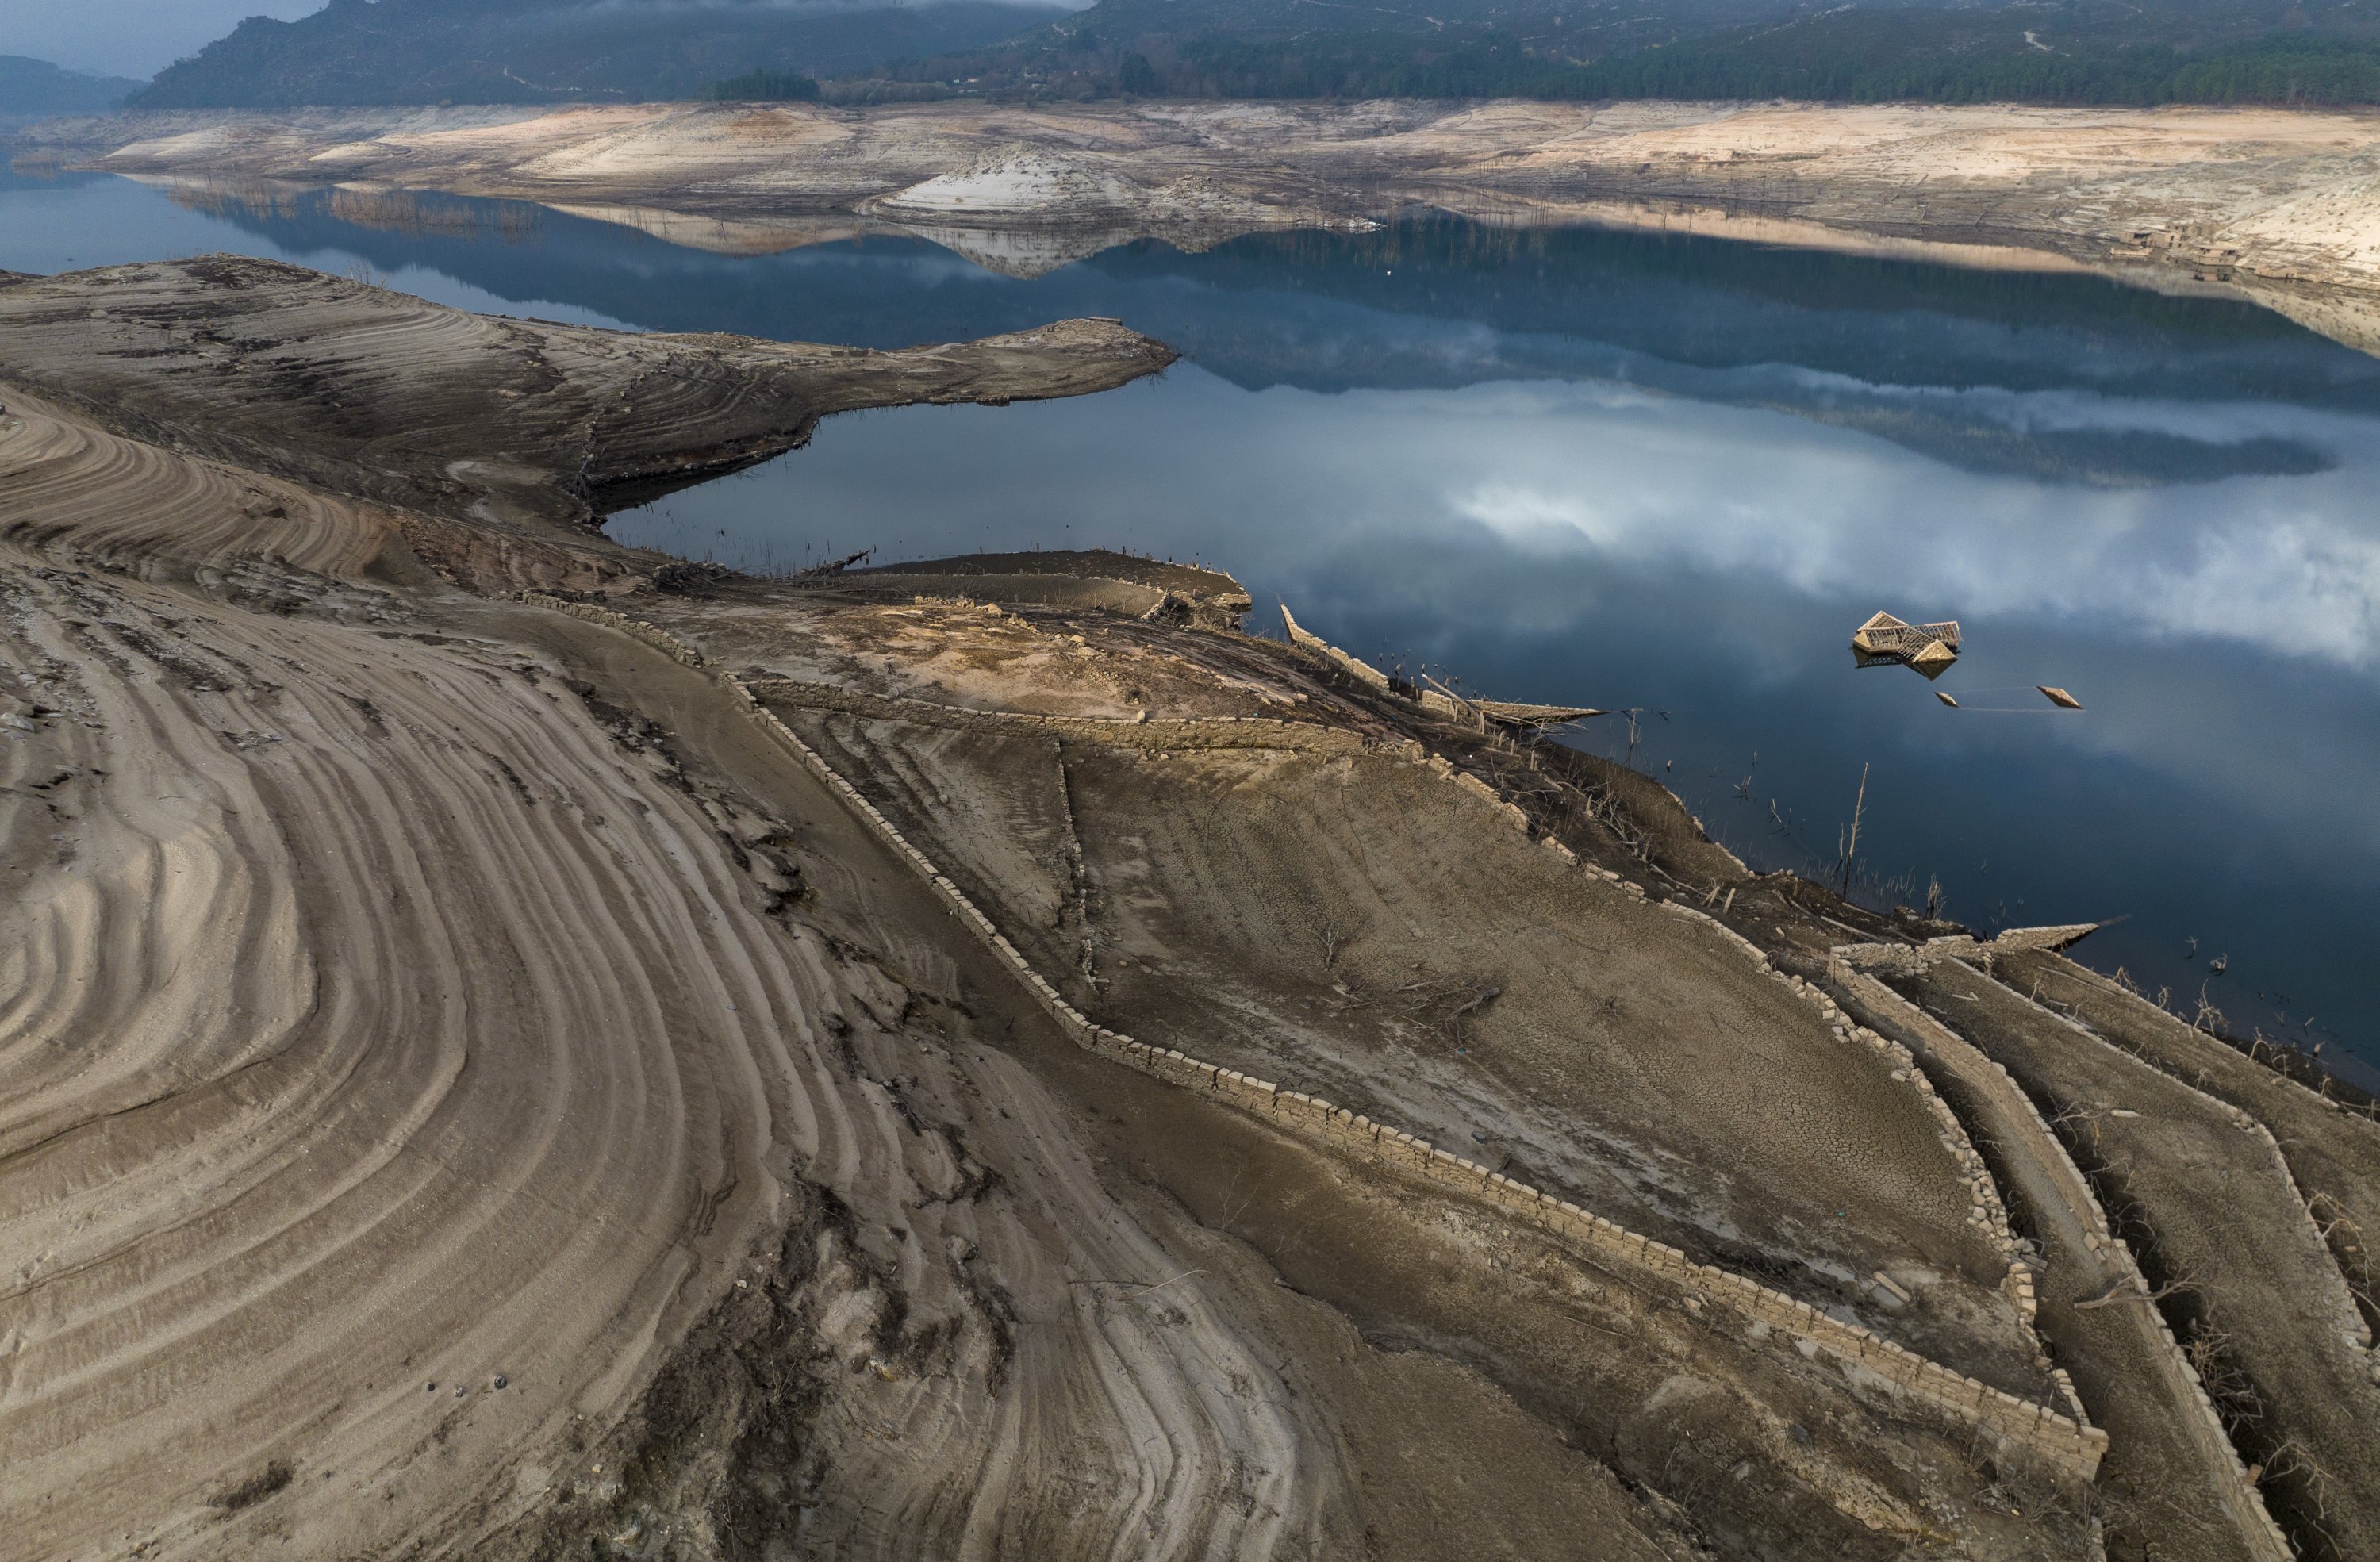 The roof of an old house, submerged three decades ago when a hydropower dam flooded the valley, is photographed emerged due to drought at the Lindoso reservoir, in northwestern Spain, Feb. 12, 2022. (AP Photo)